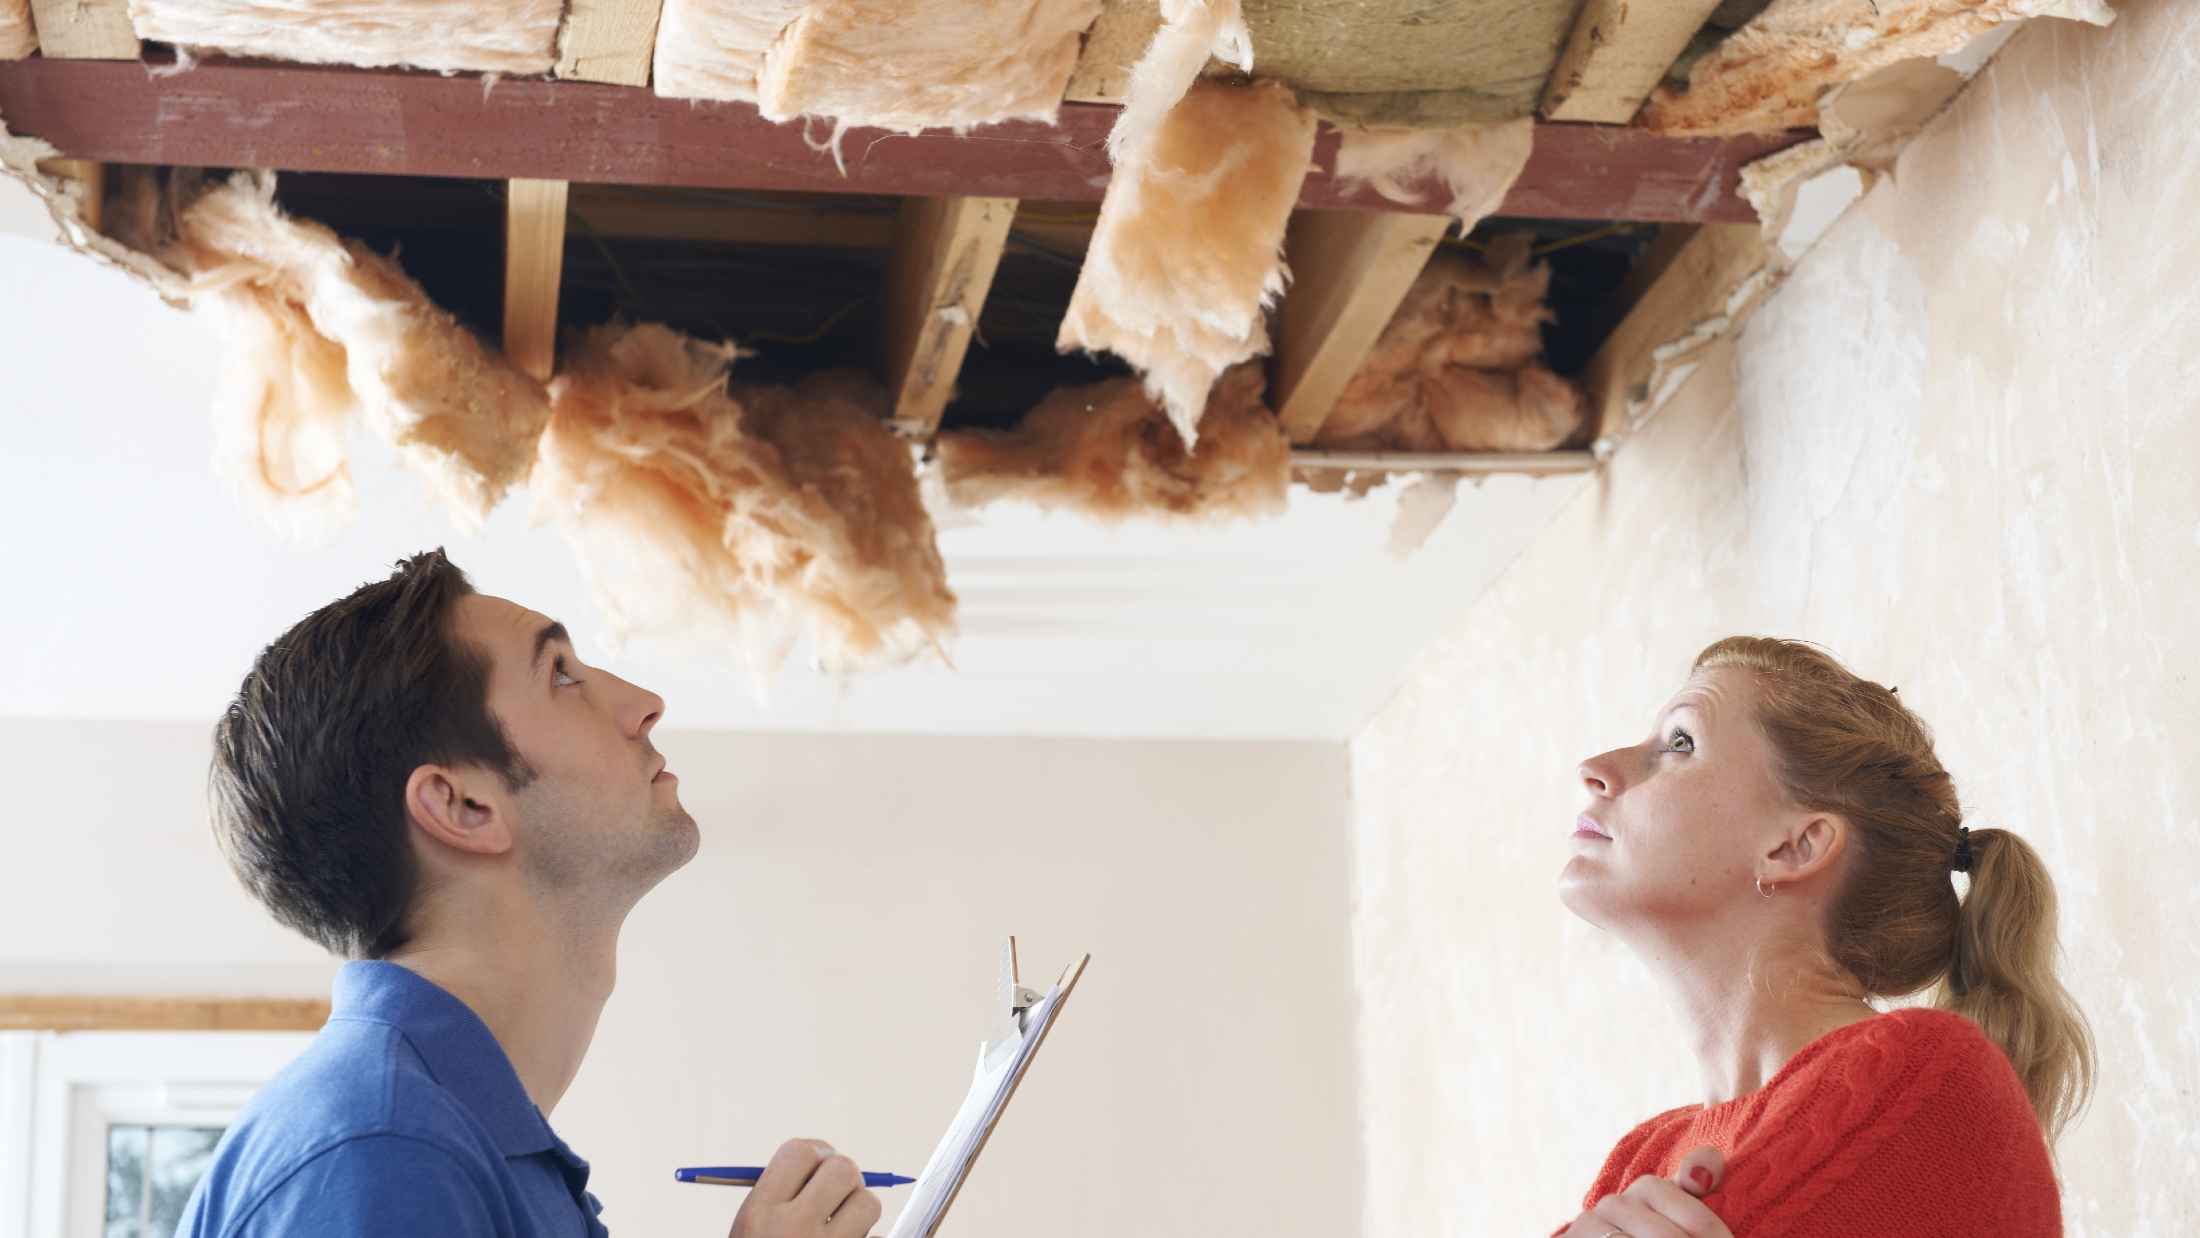 An inspector looks at a ceiling that's collapsed with a woman